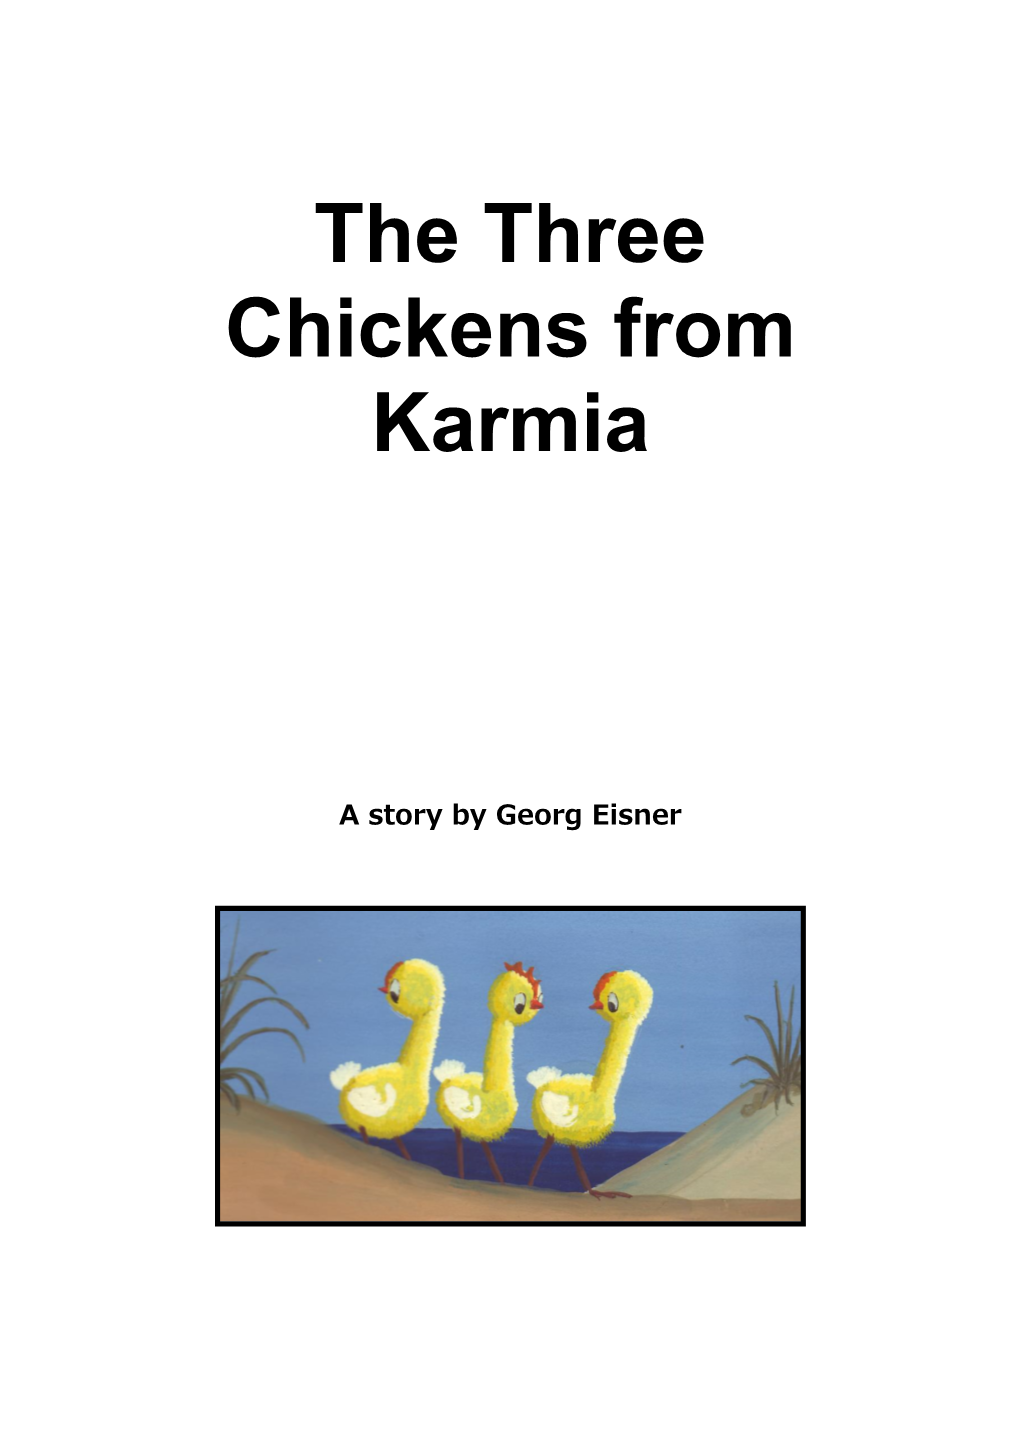 The Three Chickens from Karmia